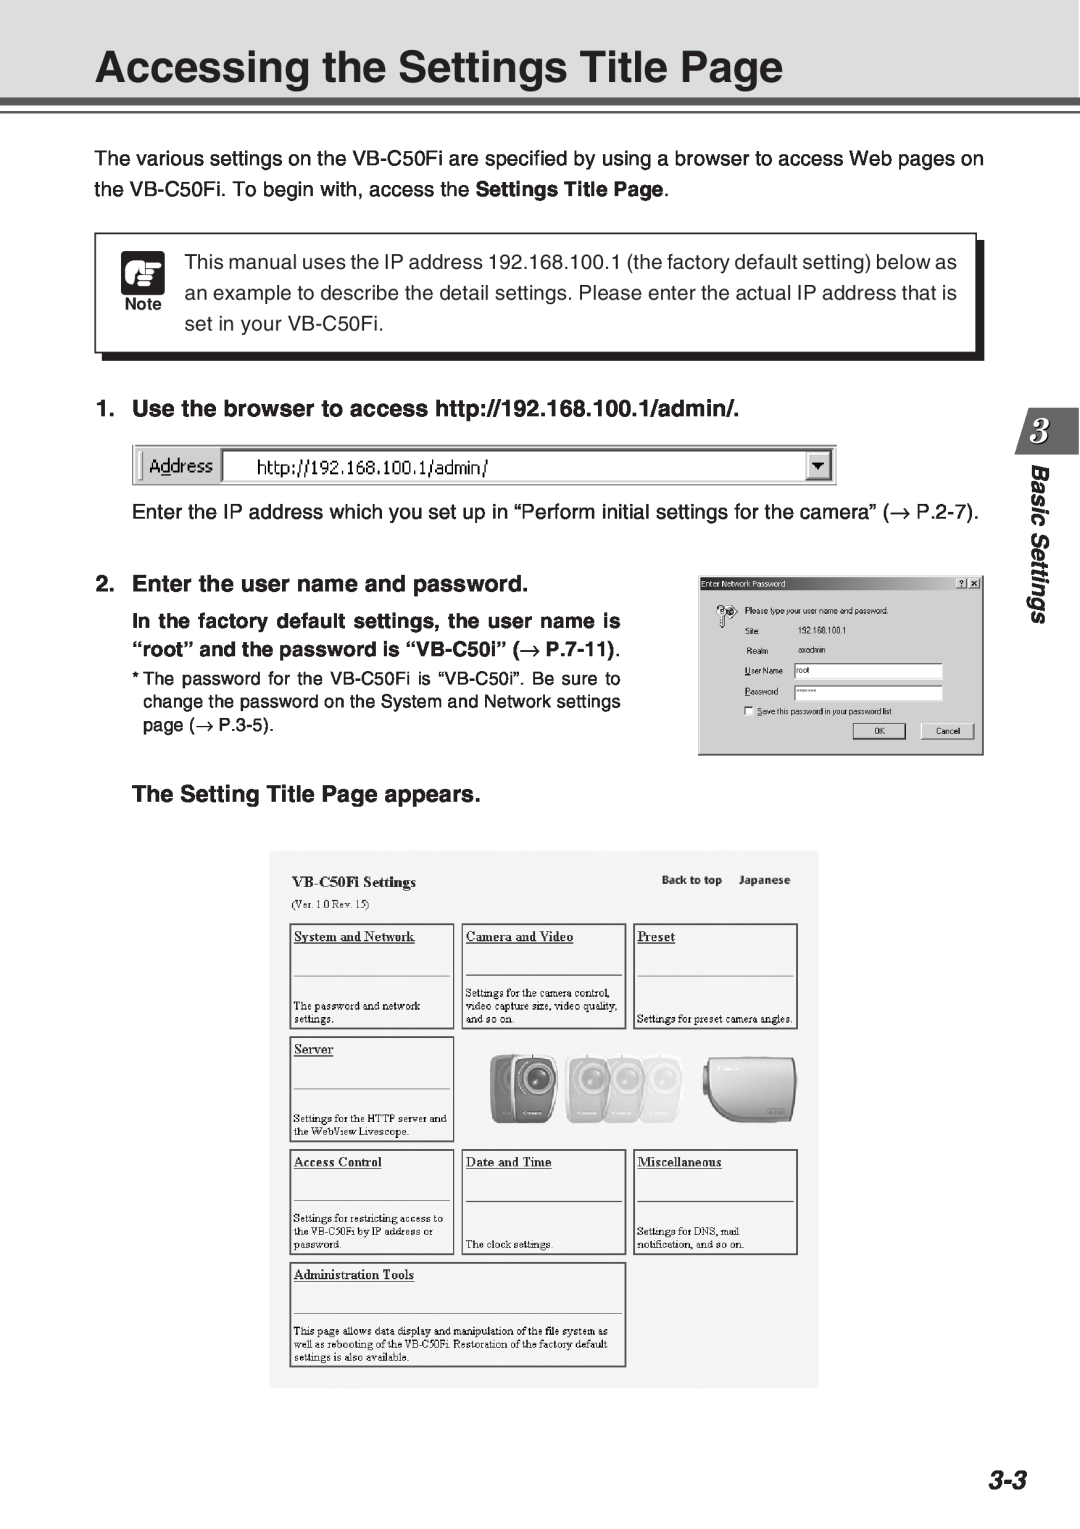 Canon Vb-C50fi Accessing the Settings Title Page, Enter the user name and password, The Setting Title Page appears 